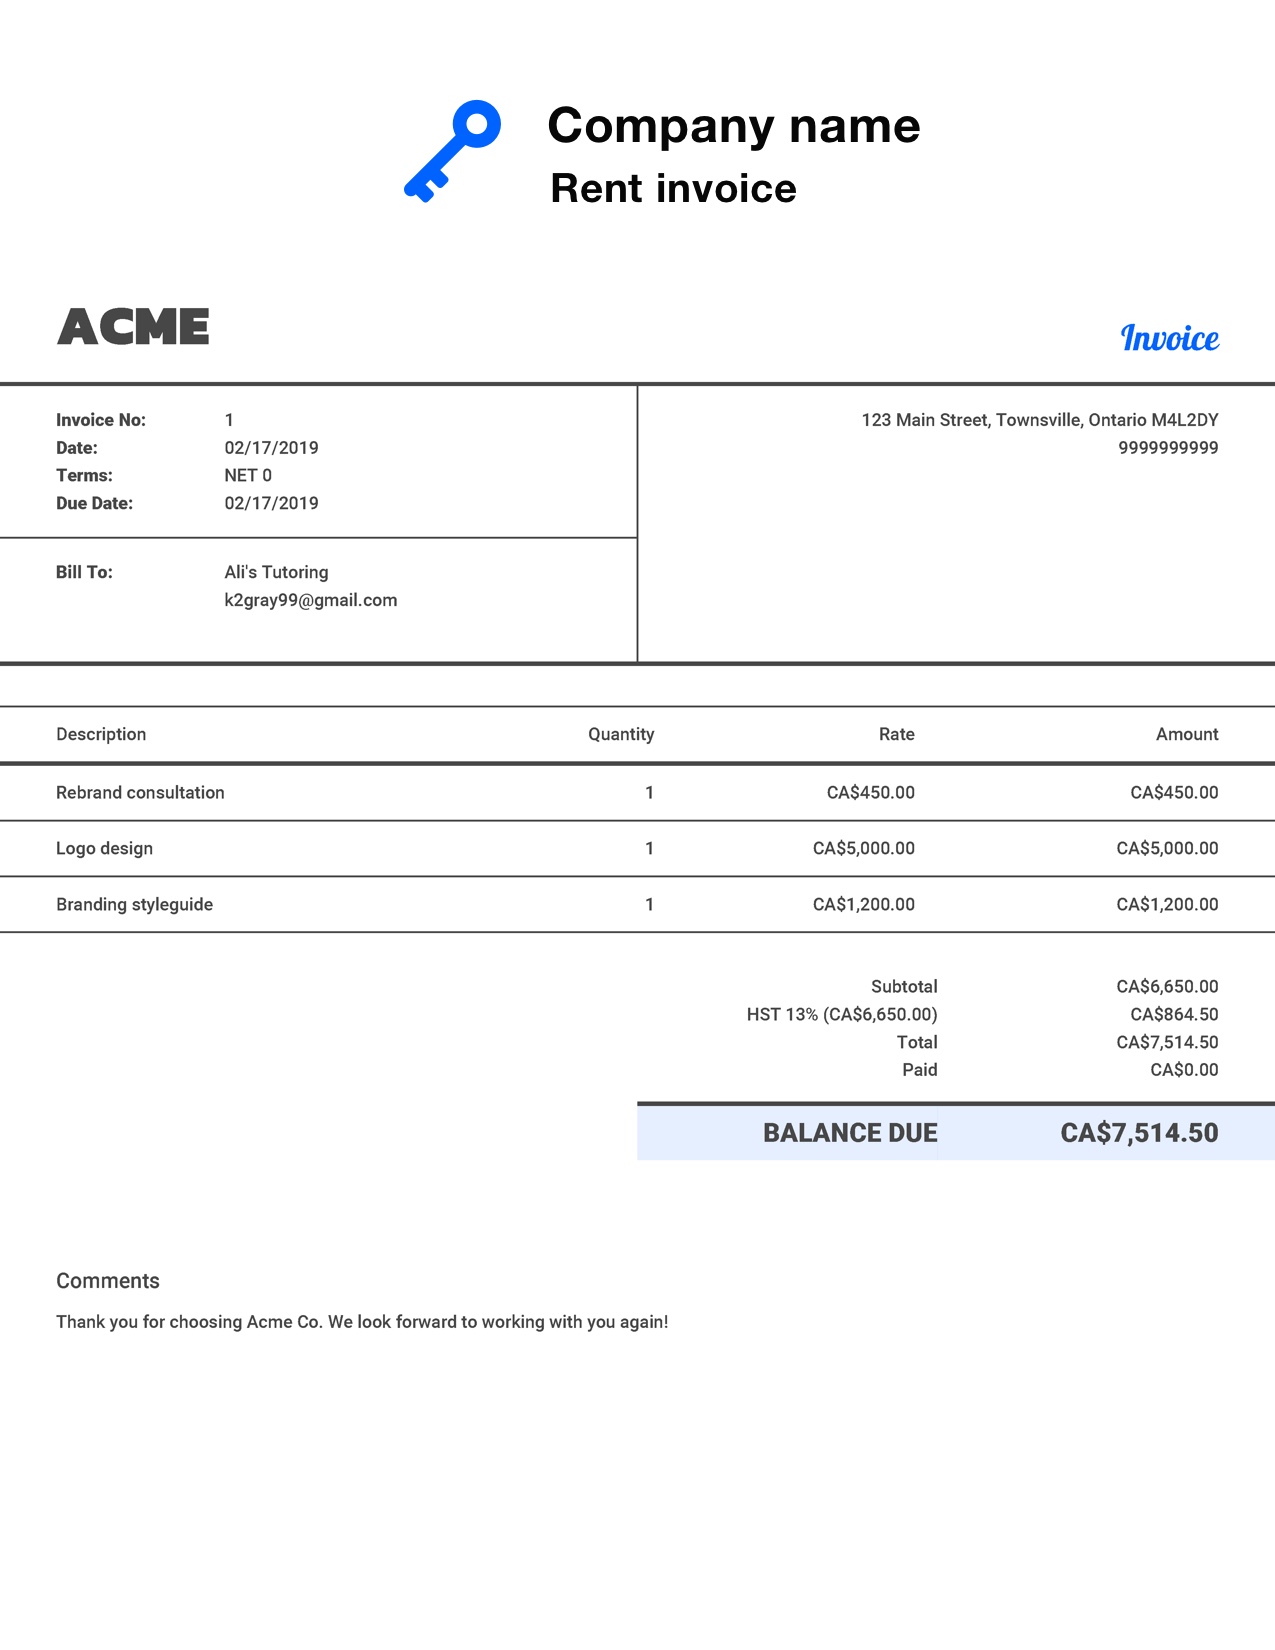 free-rent-invoice-template-customize-and-send-in-90-seconds